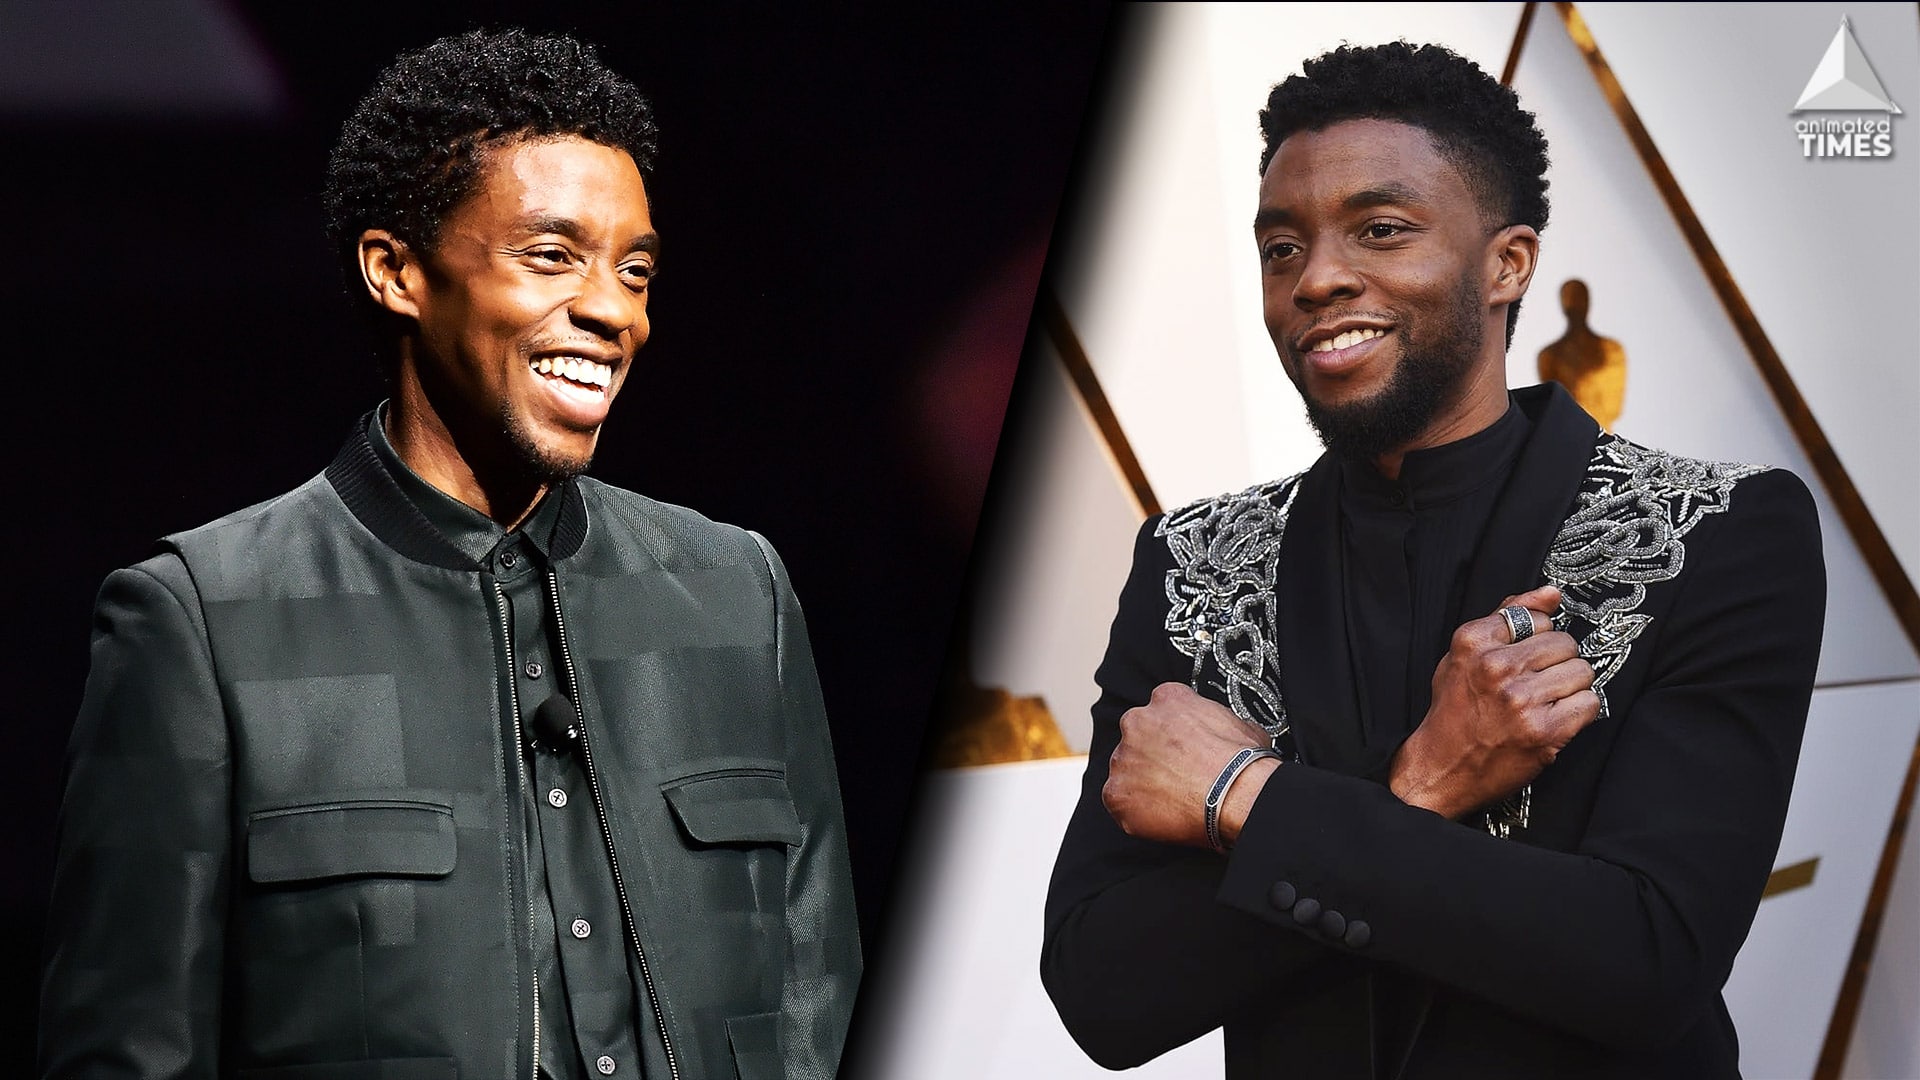 Chadwick Boseman Leaves Fans With a Powerful Final Message